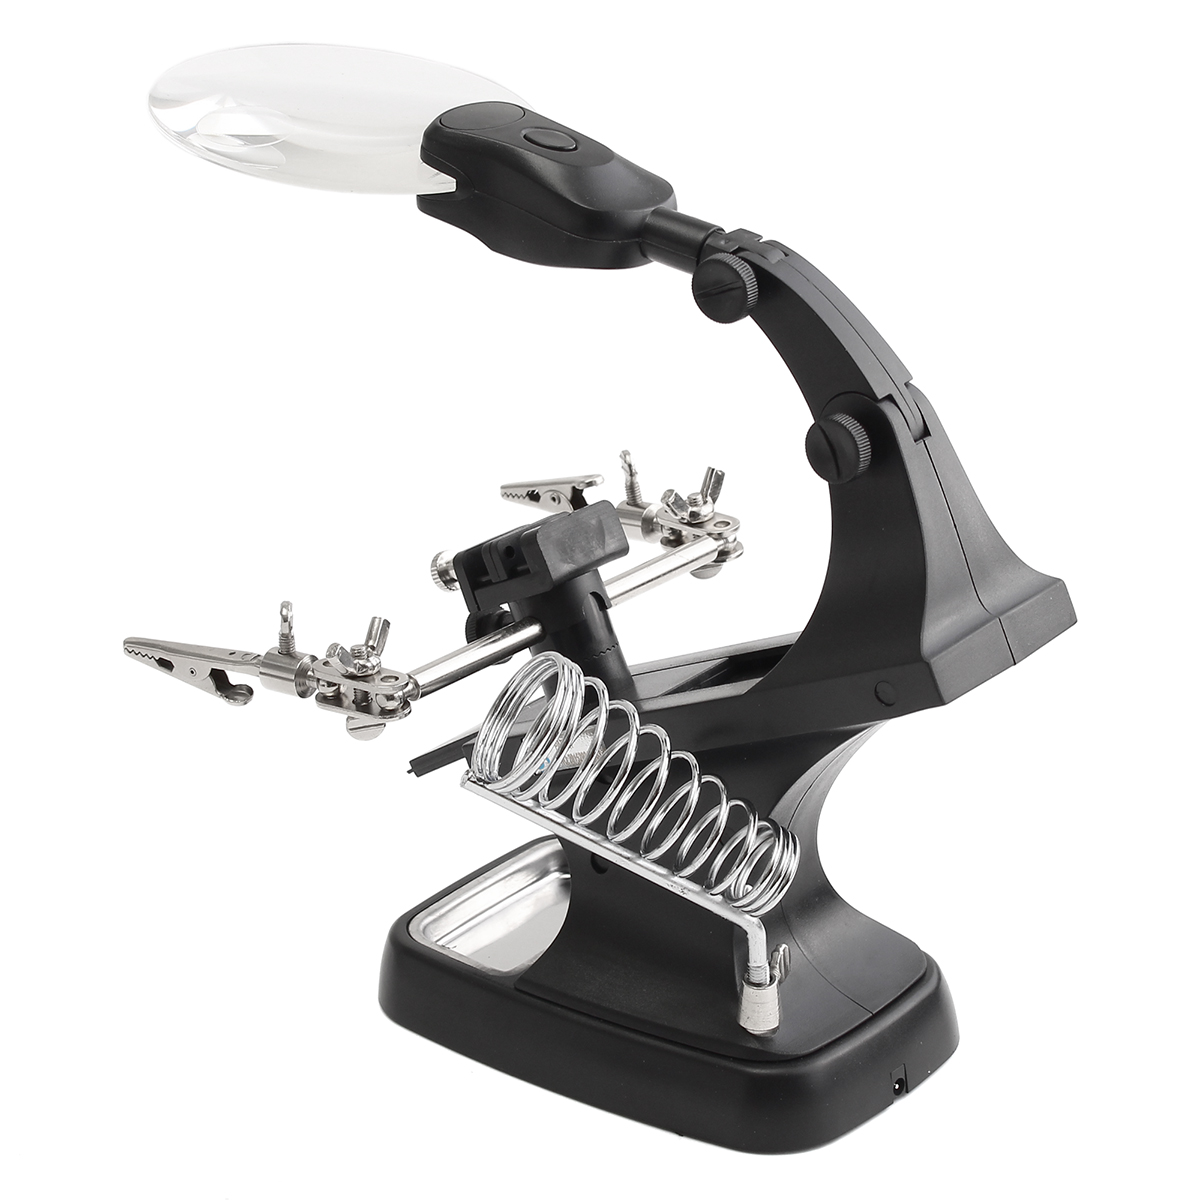 3X45X-Helping-Hand-Soldering-Welding-Stand-Magnifier-LED-With-Alligator-Clip-1127969-7